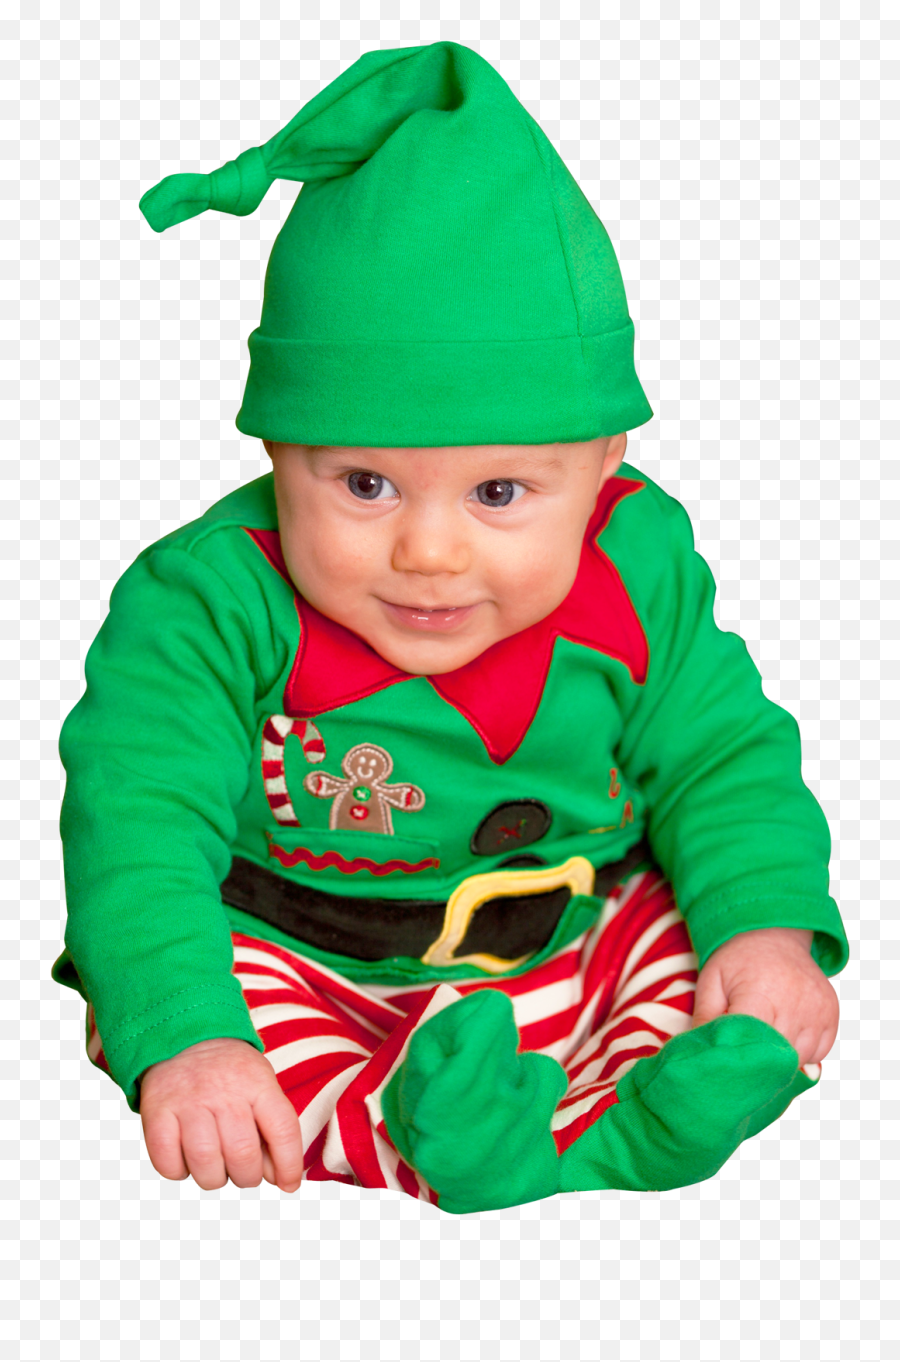 Baby Transparent Png Image - Pngpix Baby,Costume Png